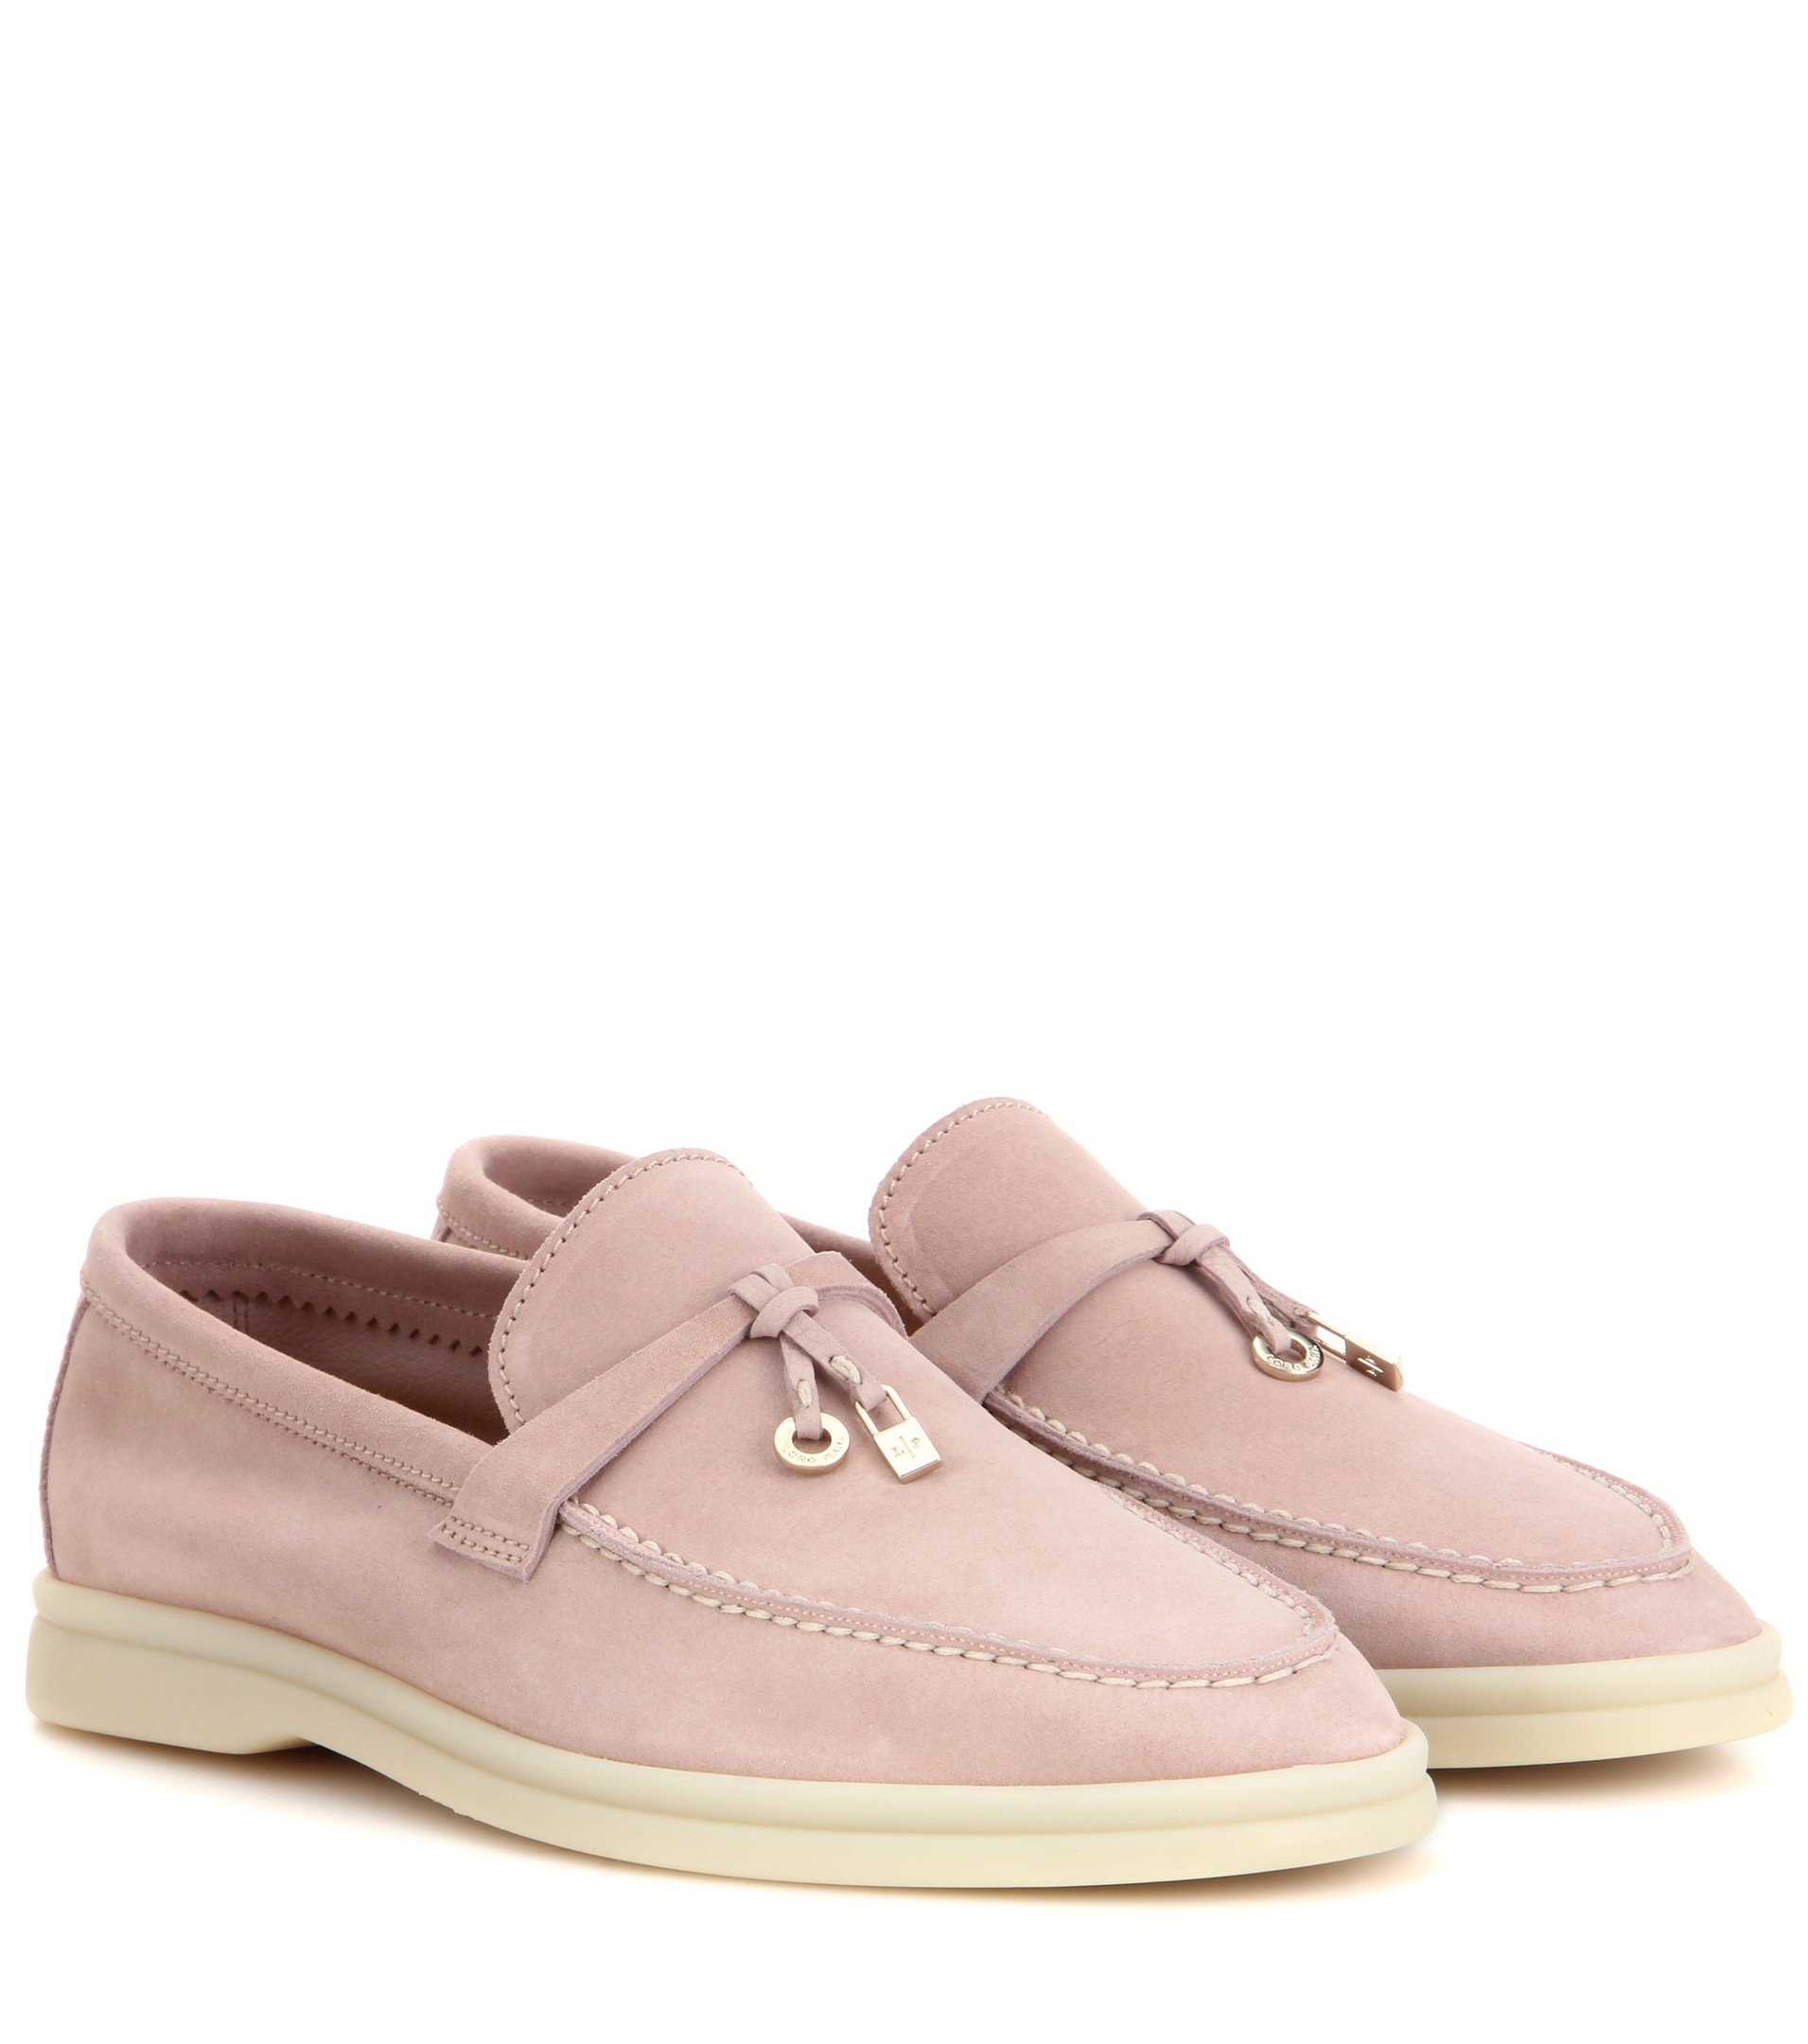 Lyst - Loro Piana Summer Charms Walk Suede Loafers in Pink